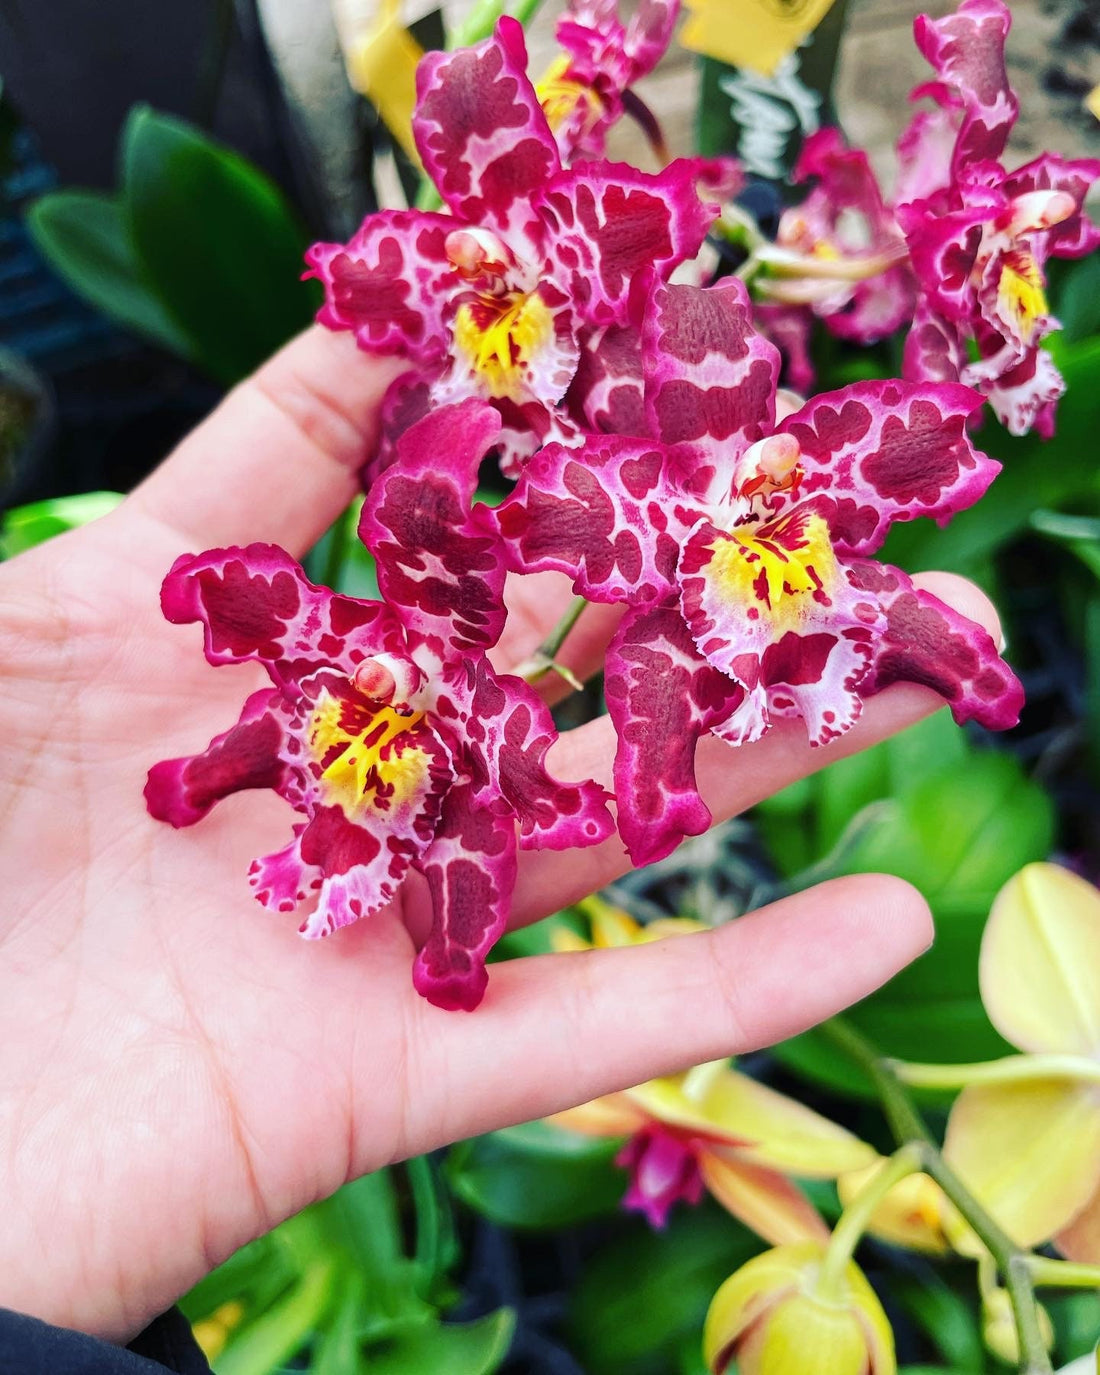 XL -1ft to 2ft  tall blooming orchid-Oncidium magenta,red -not exact plant Similar-ships with decorative ceramic pot